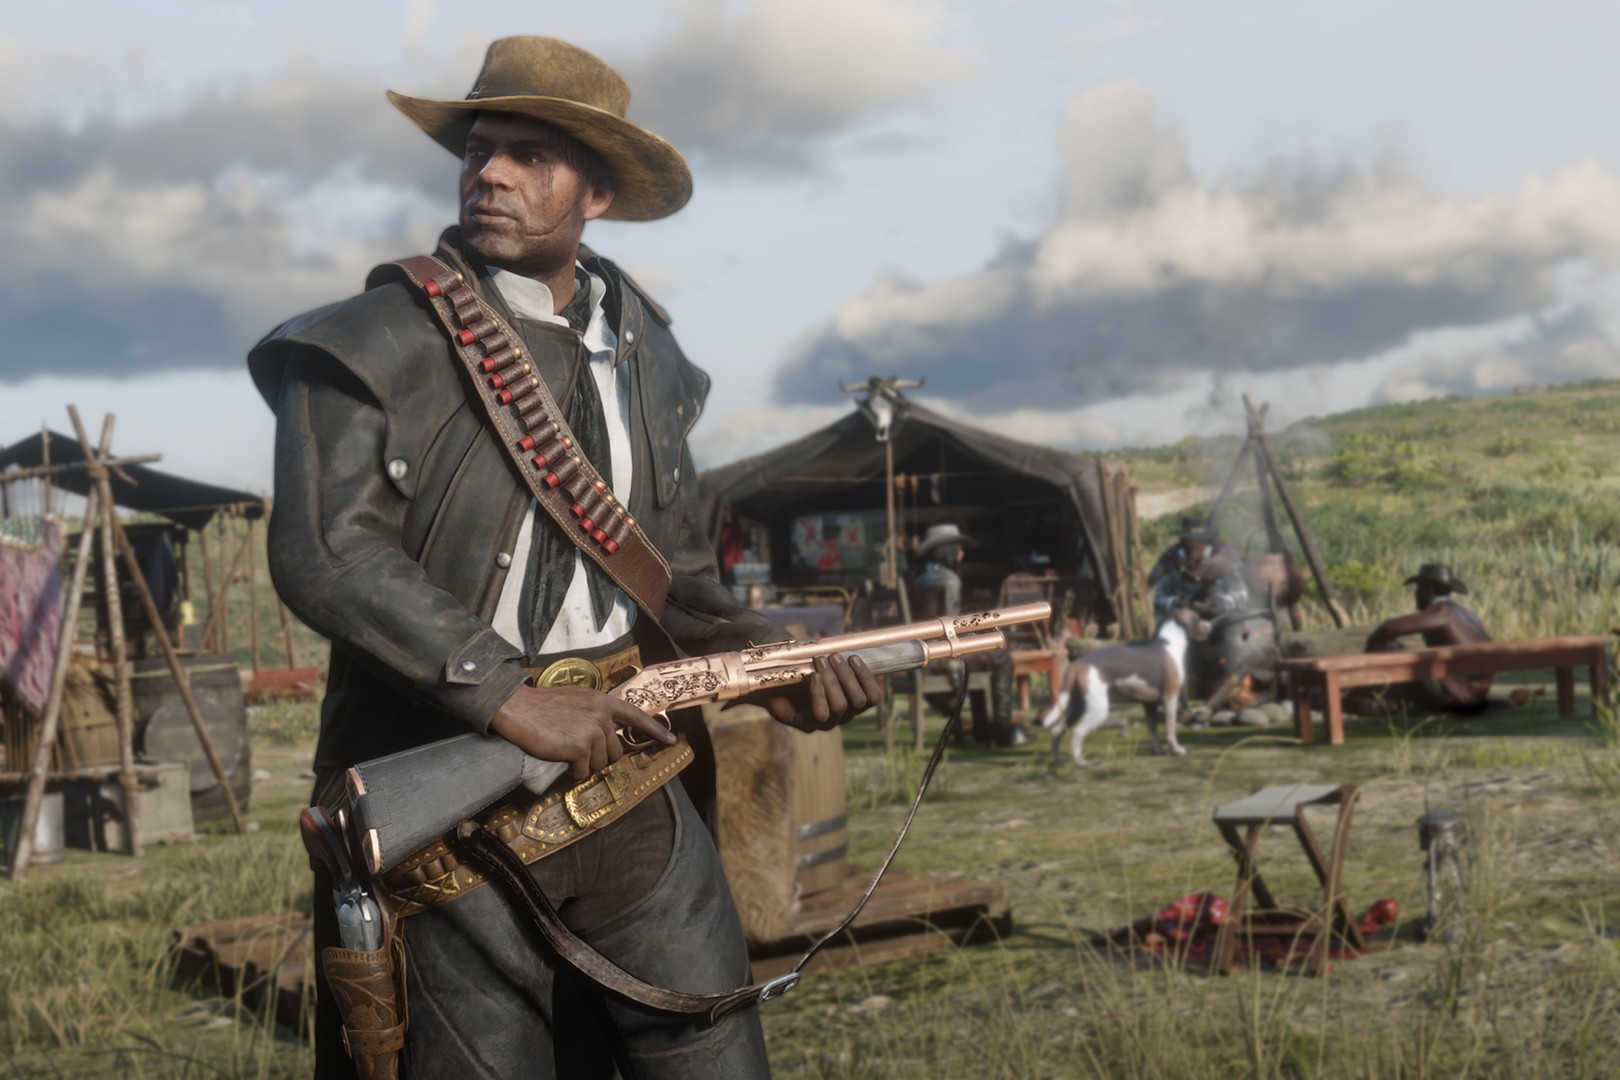 Red Dead Online Is Getting New Content Soon